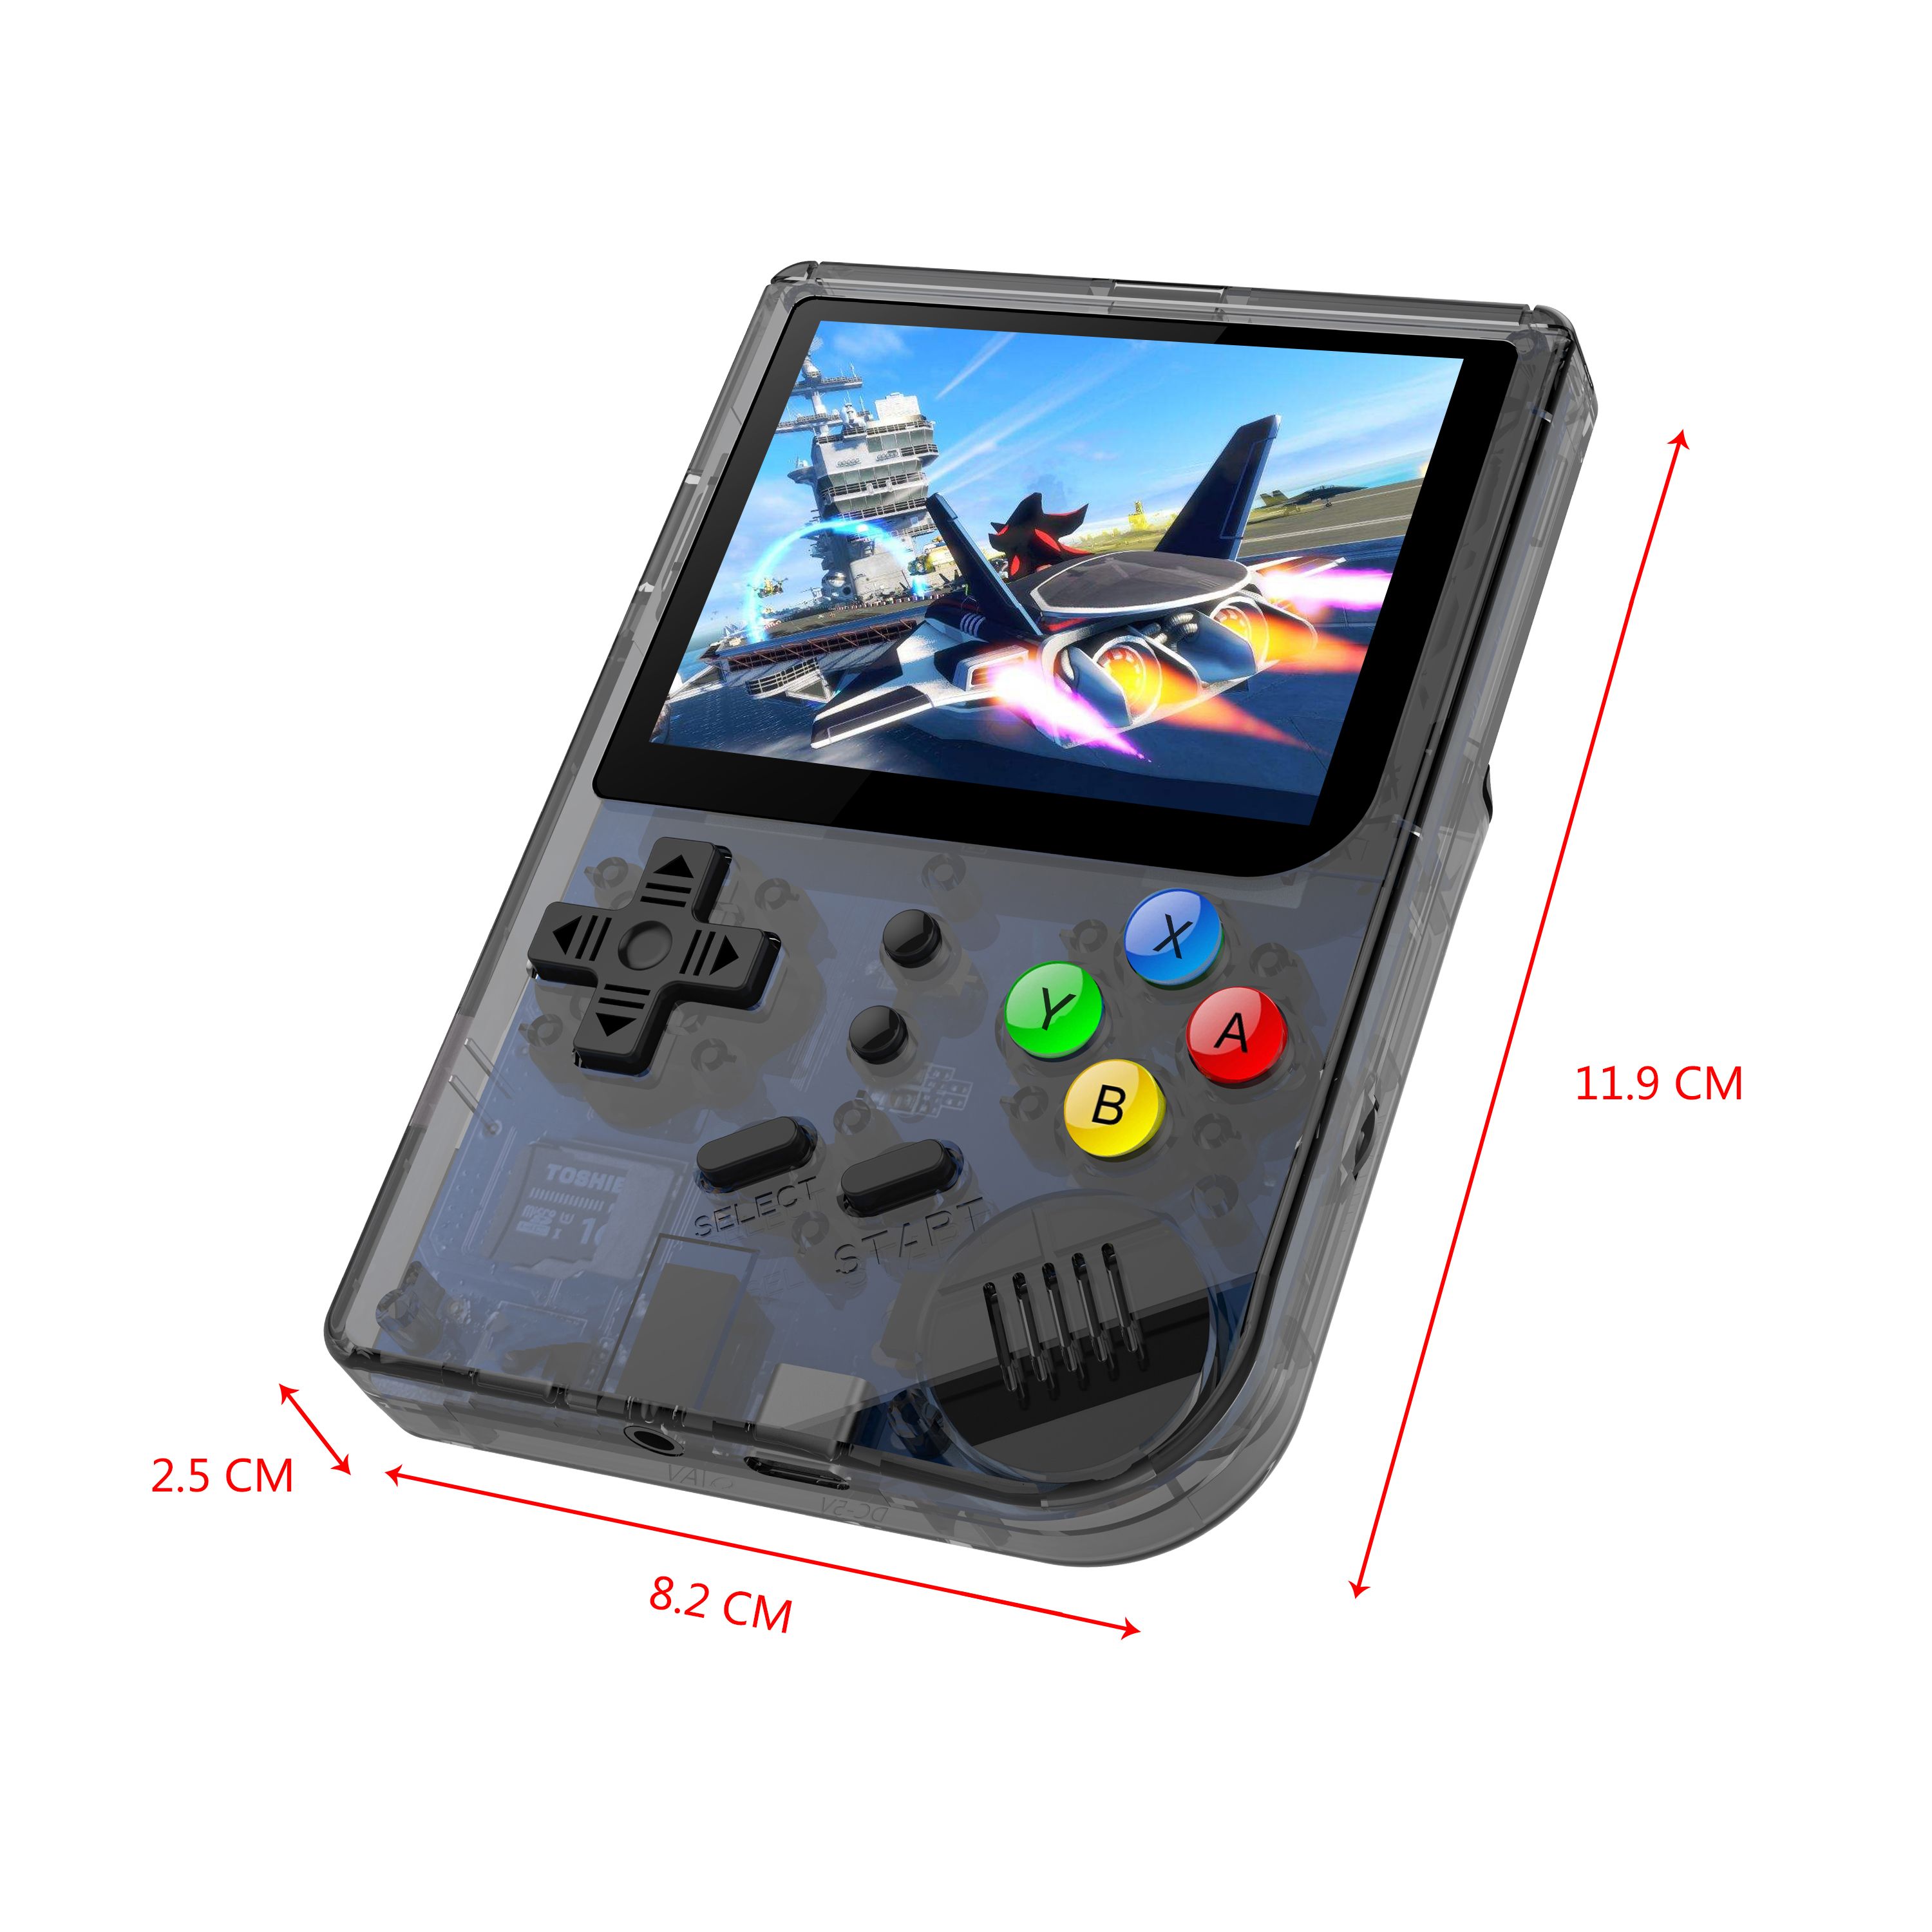 ANBERNIC-RG300-3-Inch-IPS-Screen-48GB-13000-Games-Linux-Retro-Game-Console-Portable-Handheld-Video-G-1667908